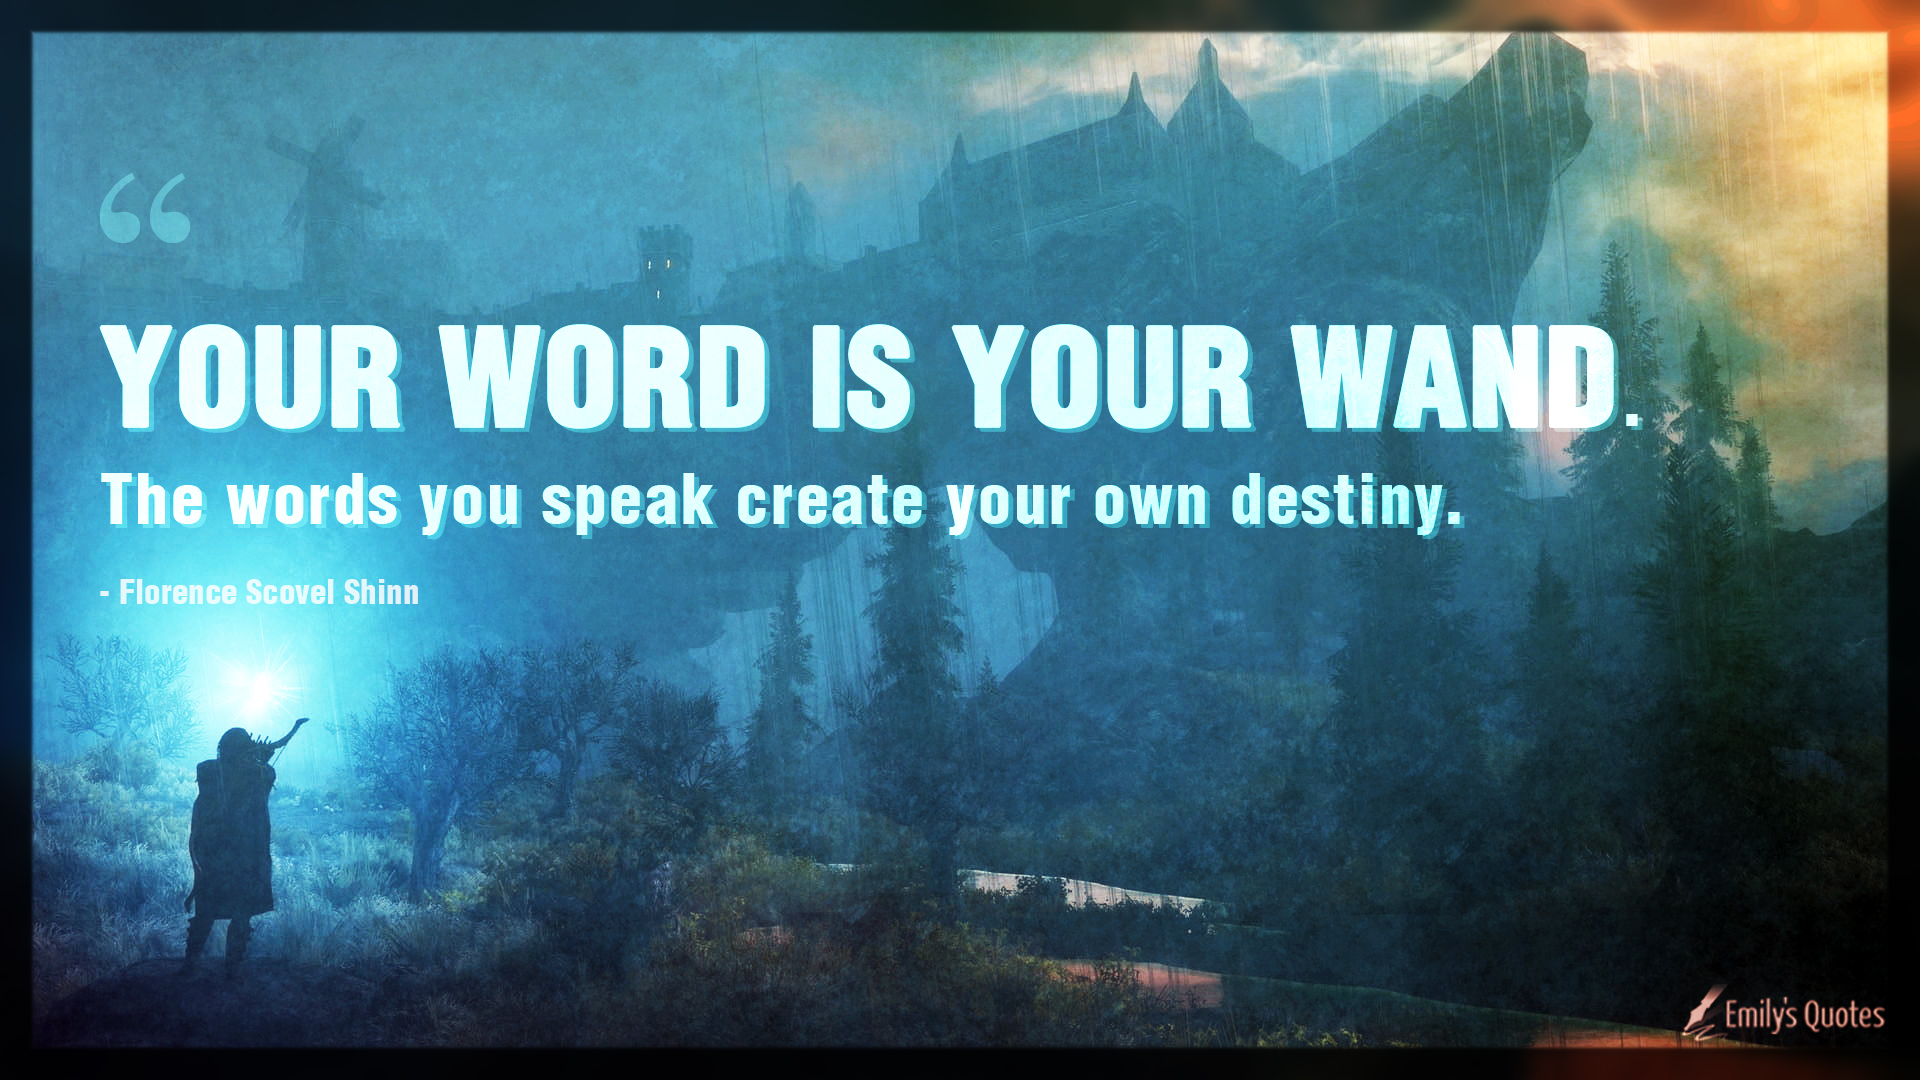 Your word is your wand. The words you speak create your own destiny